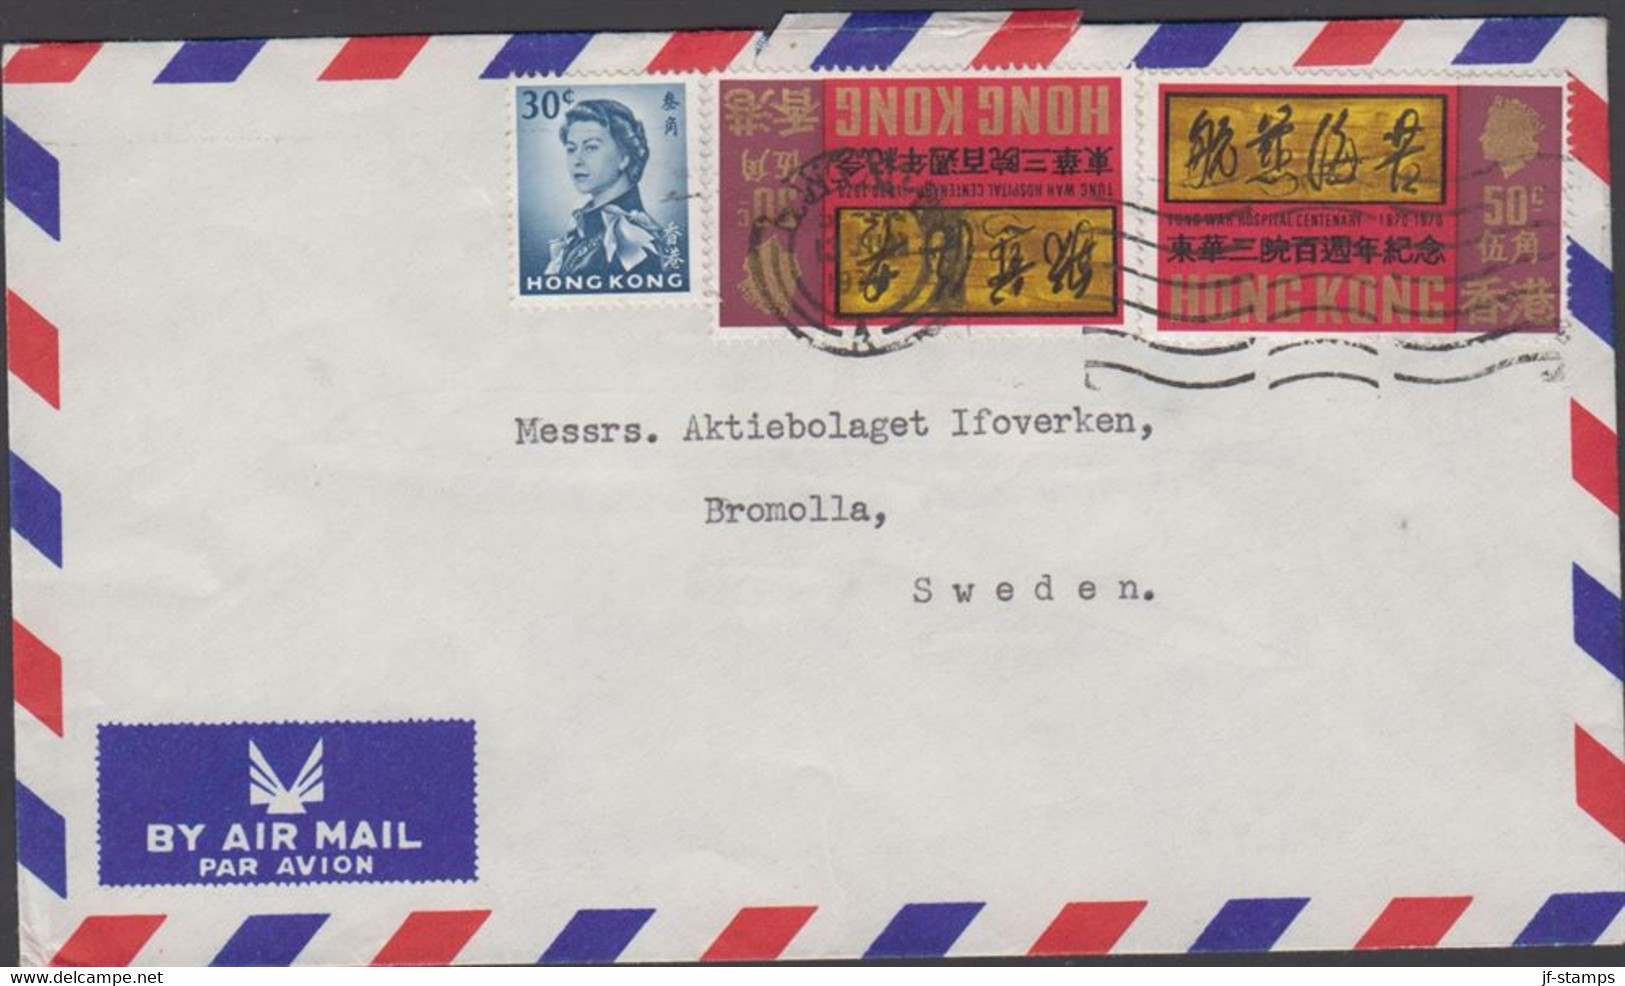 1970. HONG KONG. 30 C Elizabeth + 2 Ex 50 C TUNG WAH HOSPITAL  On AIR MAIL Cover To Bromolla... (Michel 251+) - JF427103 - Storia Postale